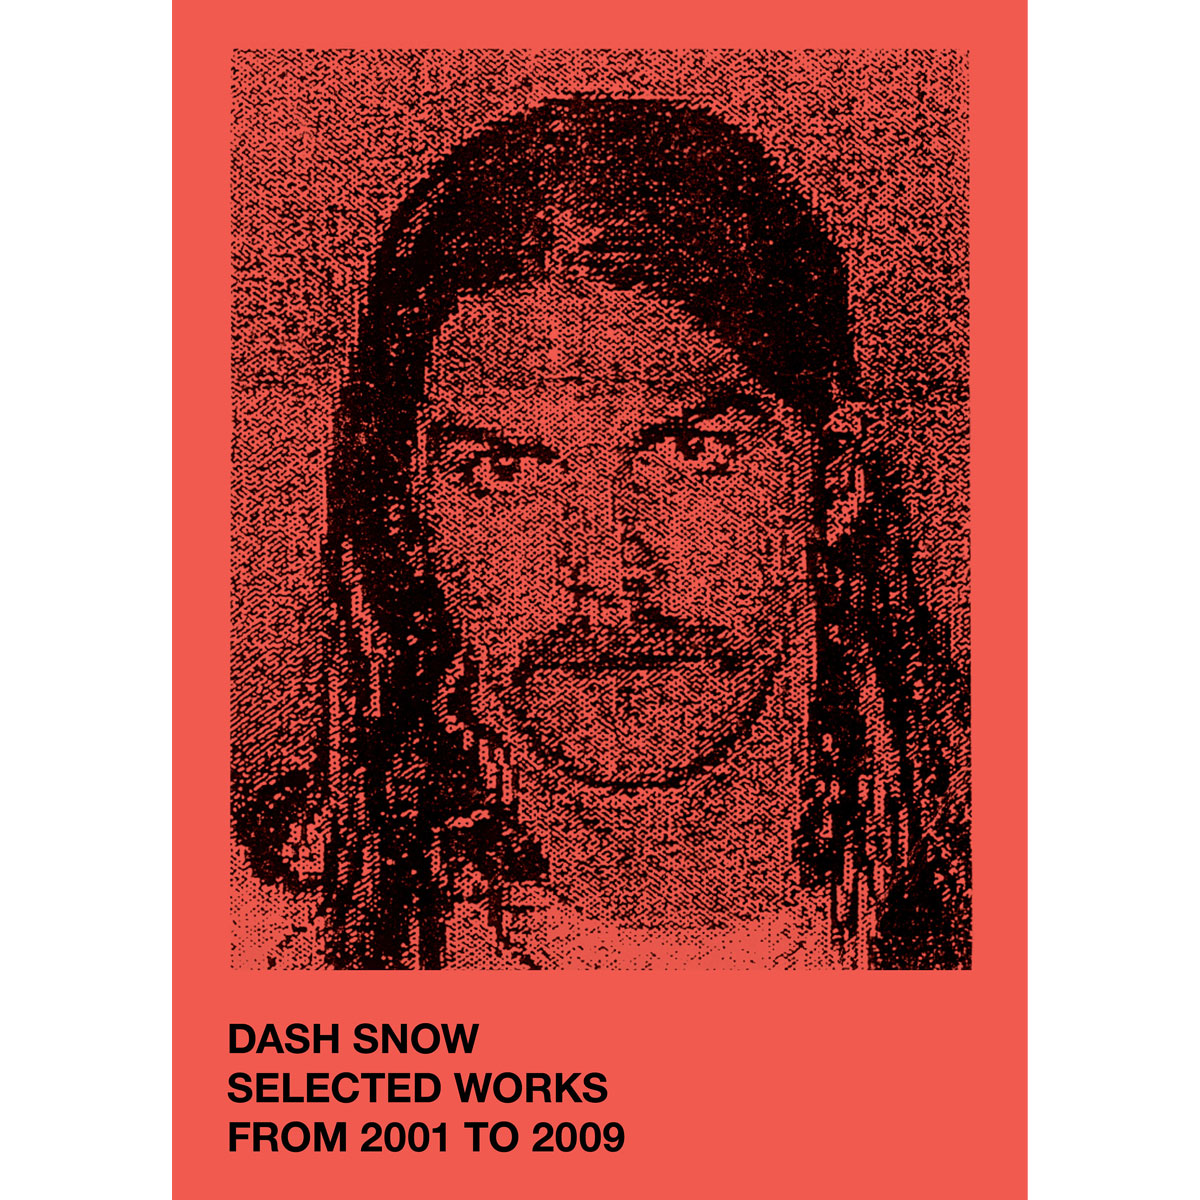 DASH SNOW Selected works from 2001 to 2009